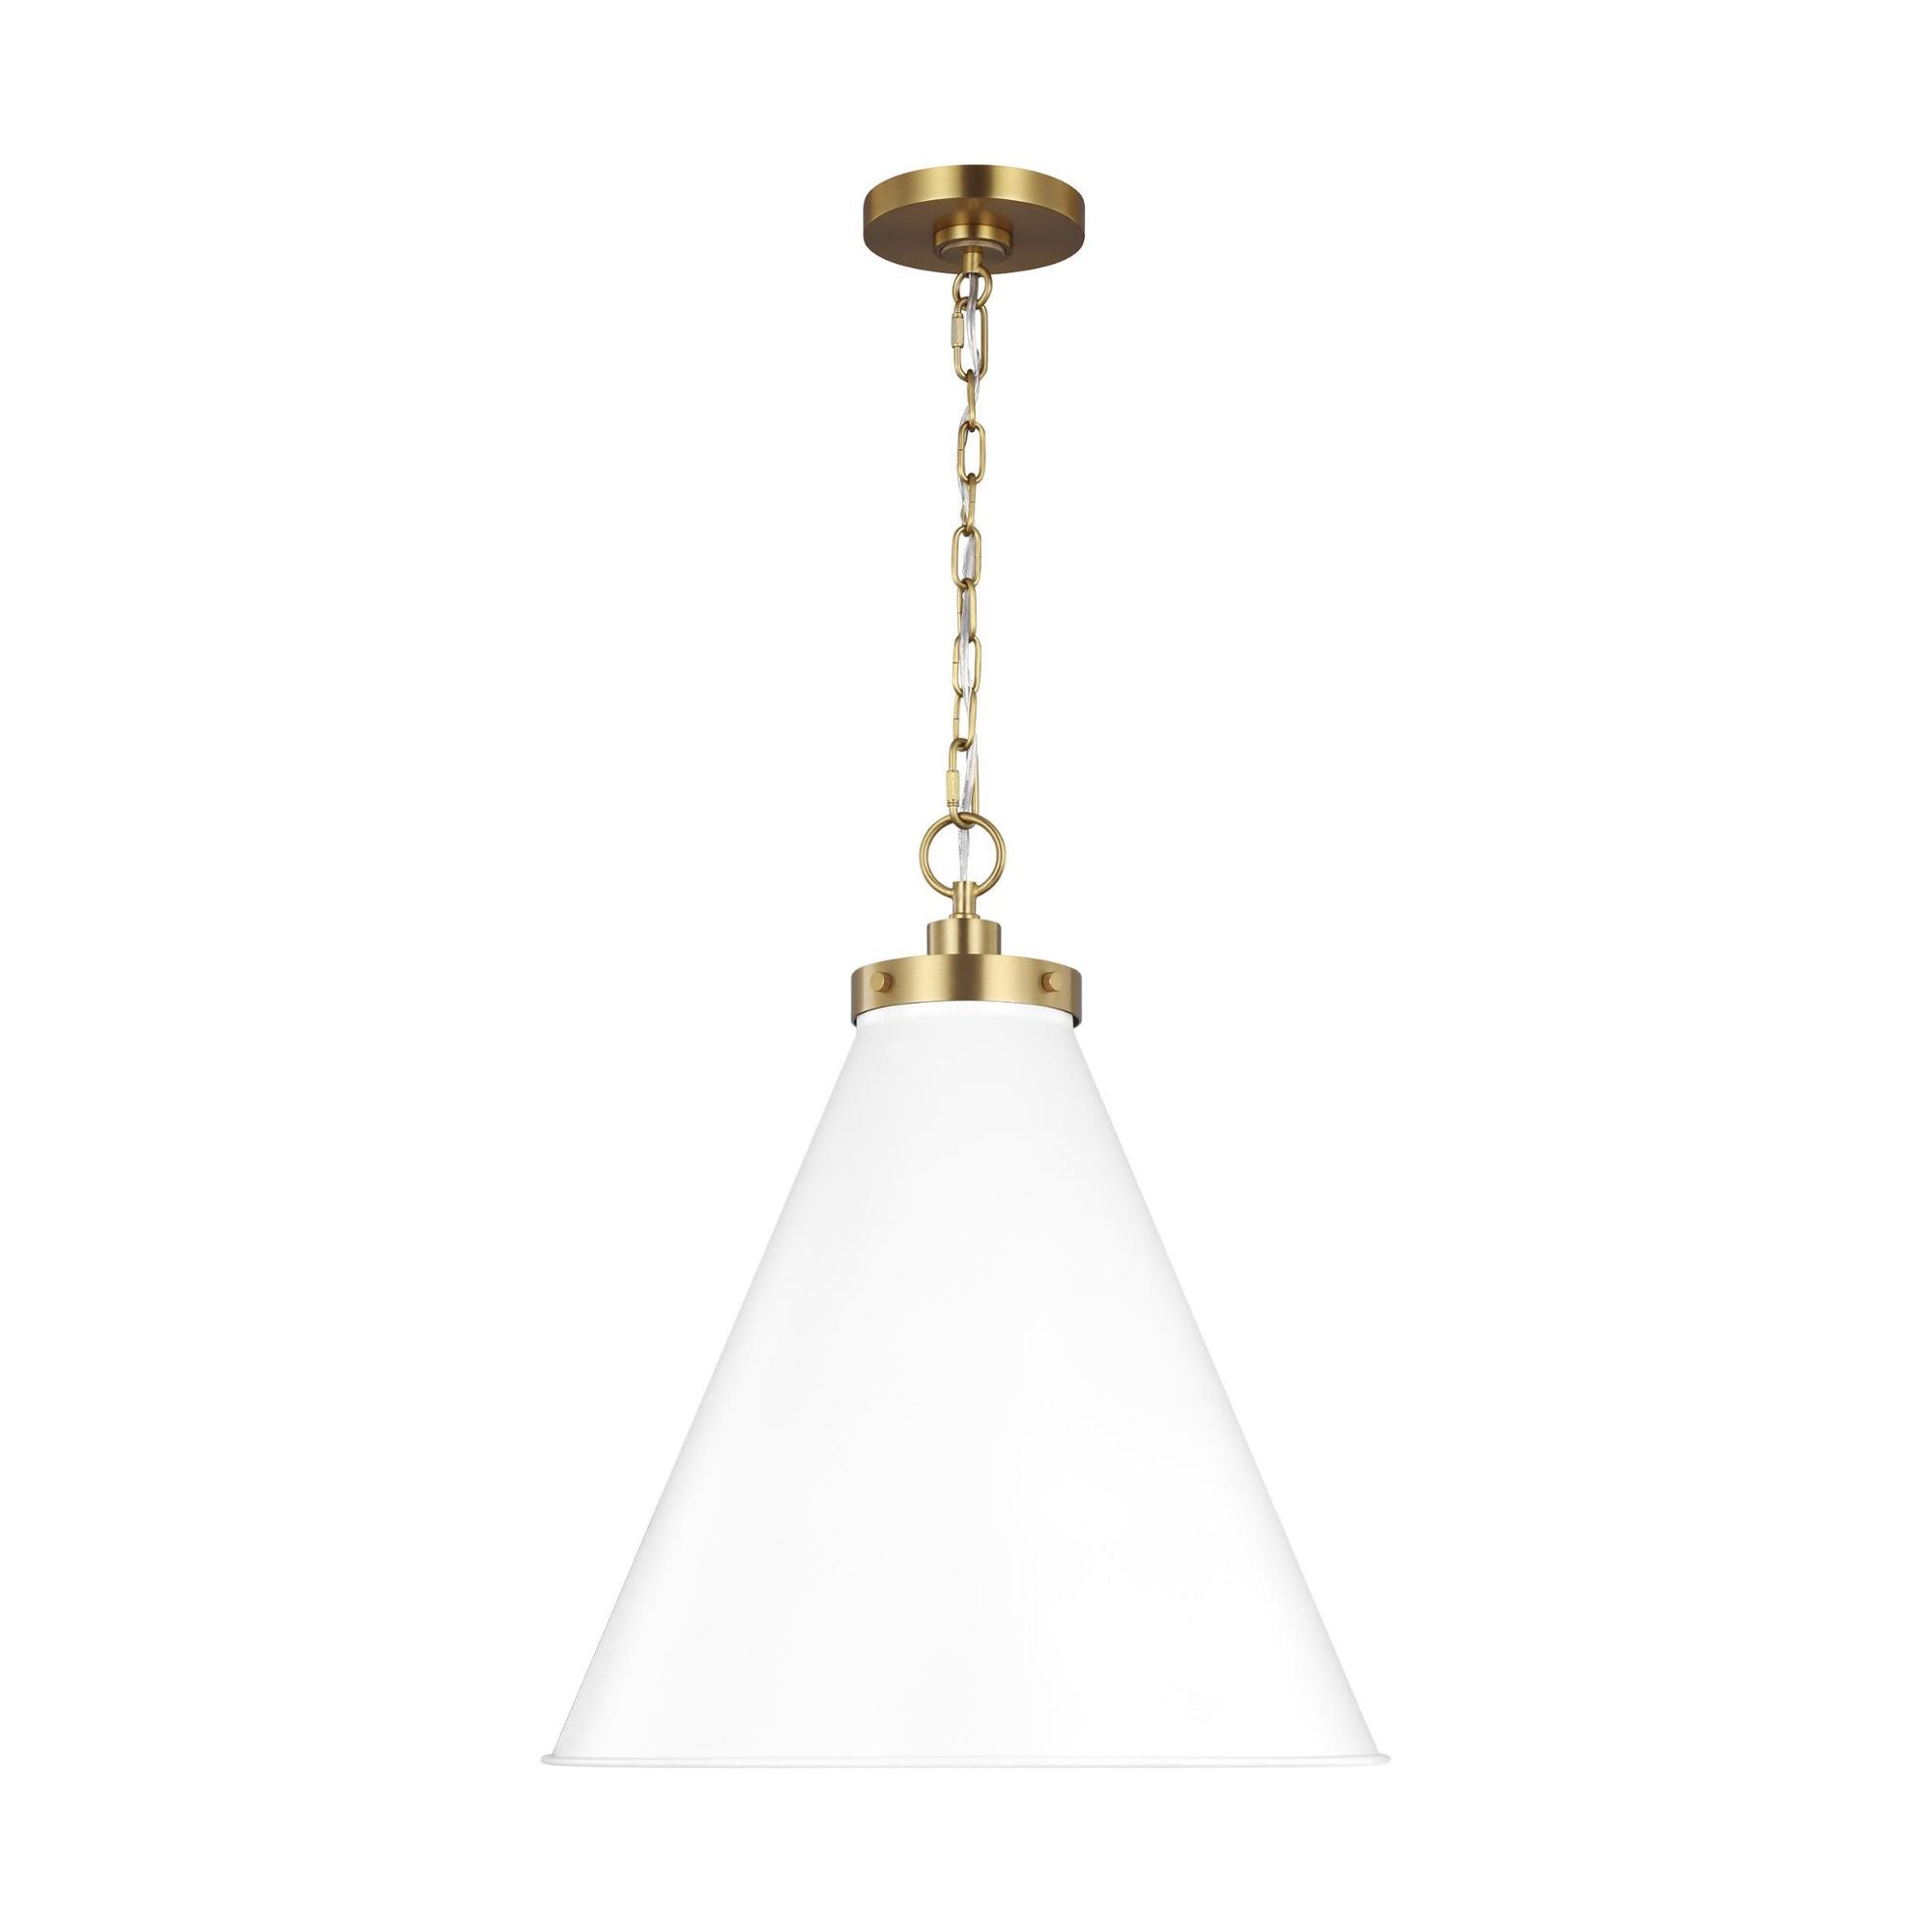 Chapman & Myers Wellfleet Large Cone Pendant in Matte White and Burnished Brass